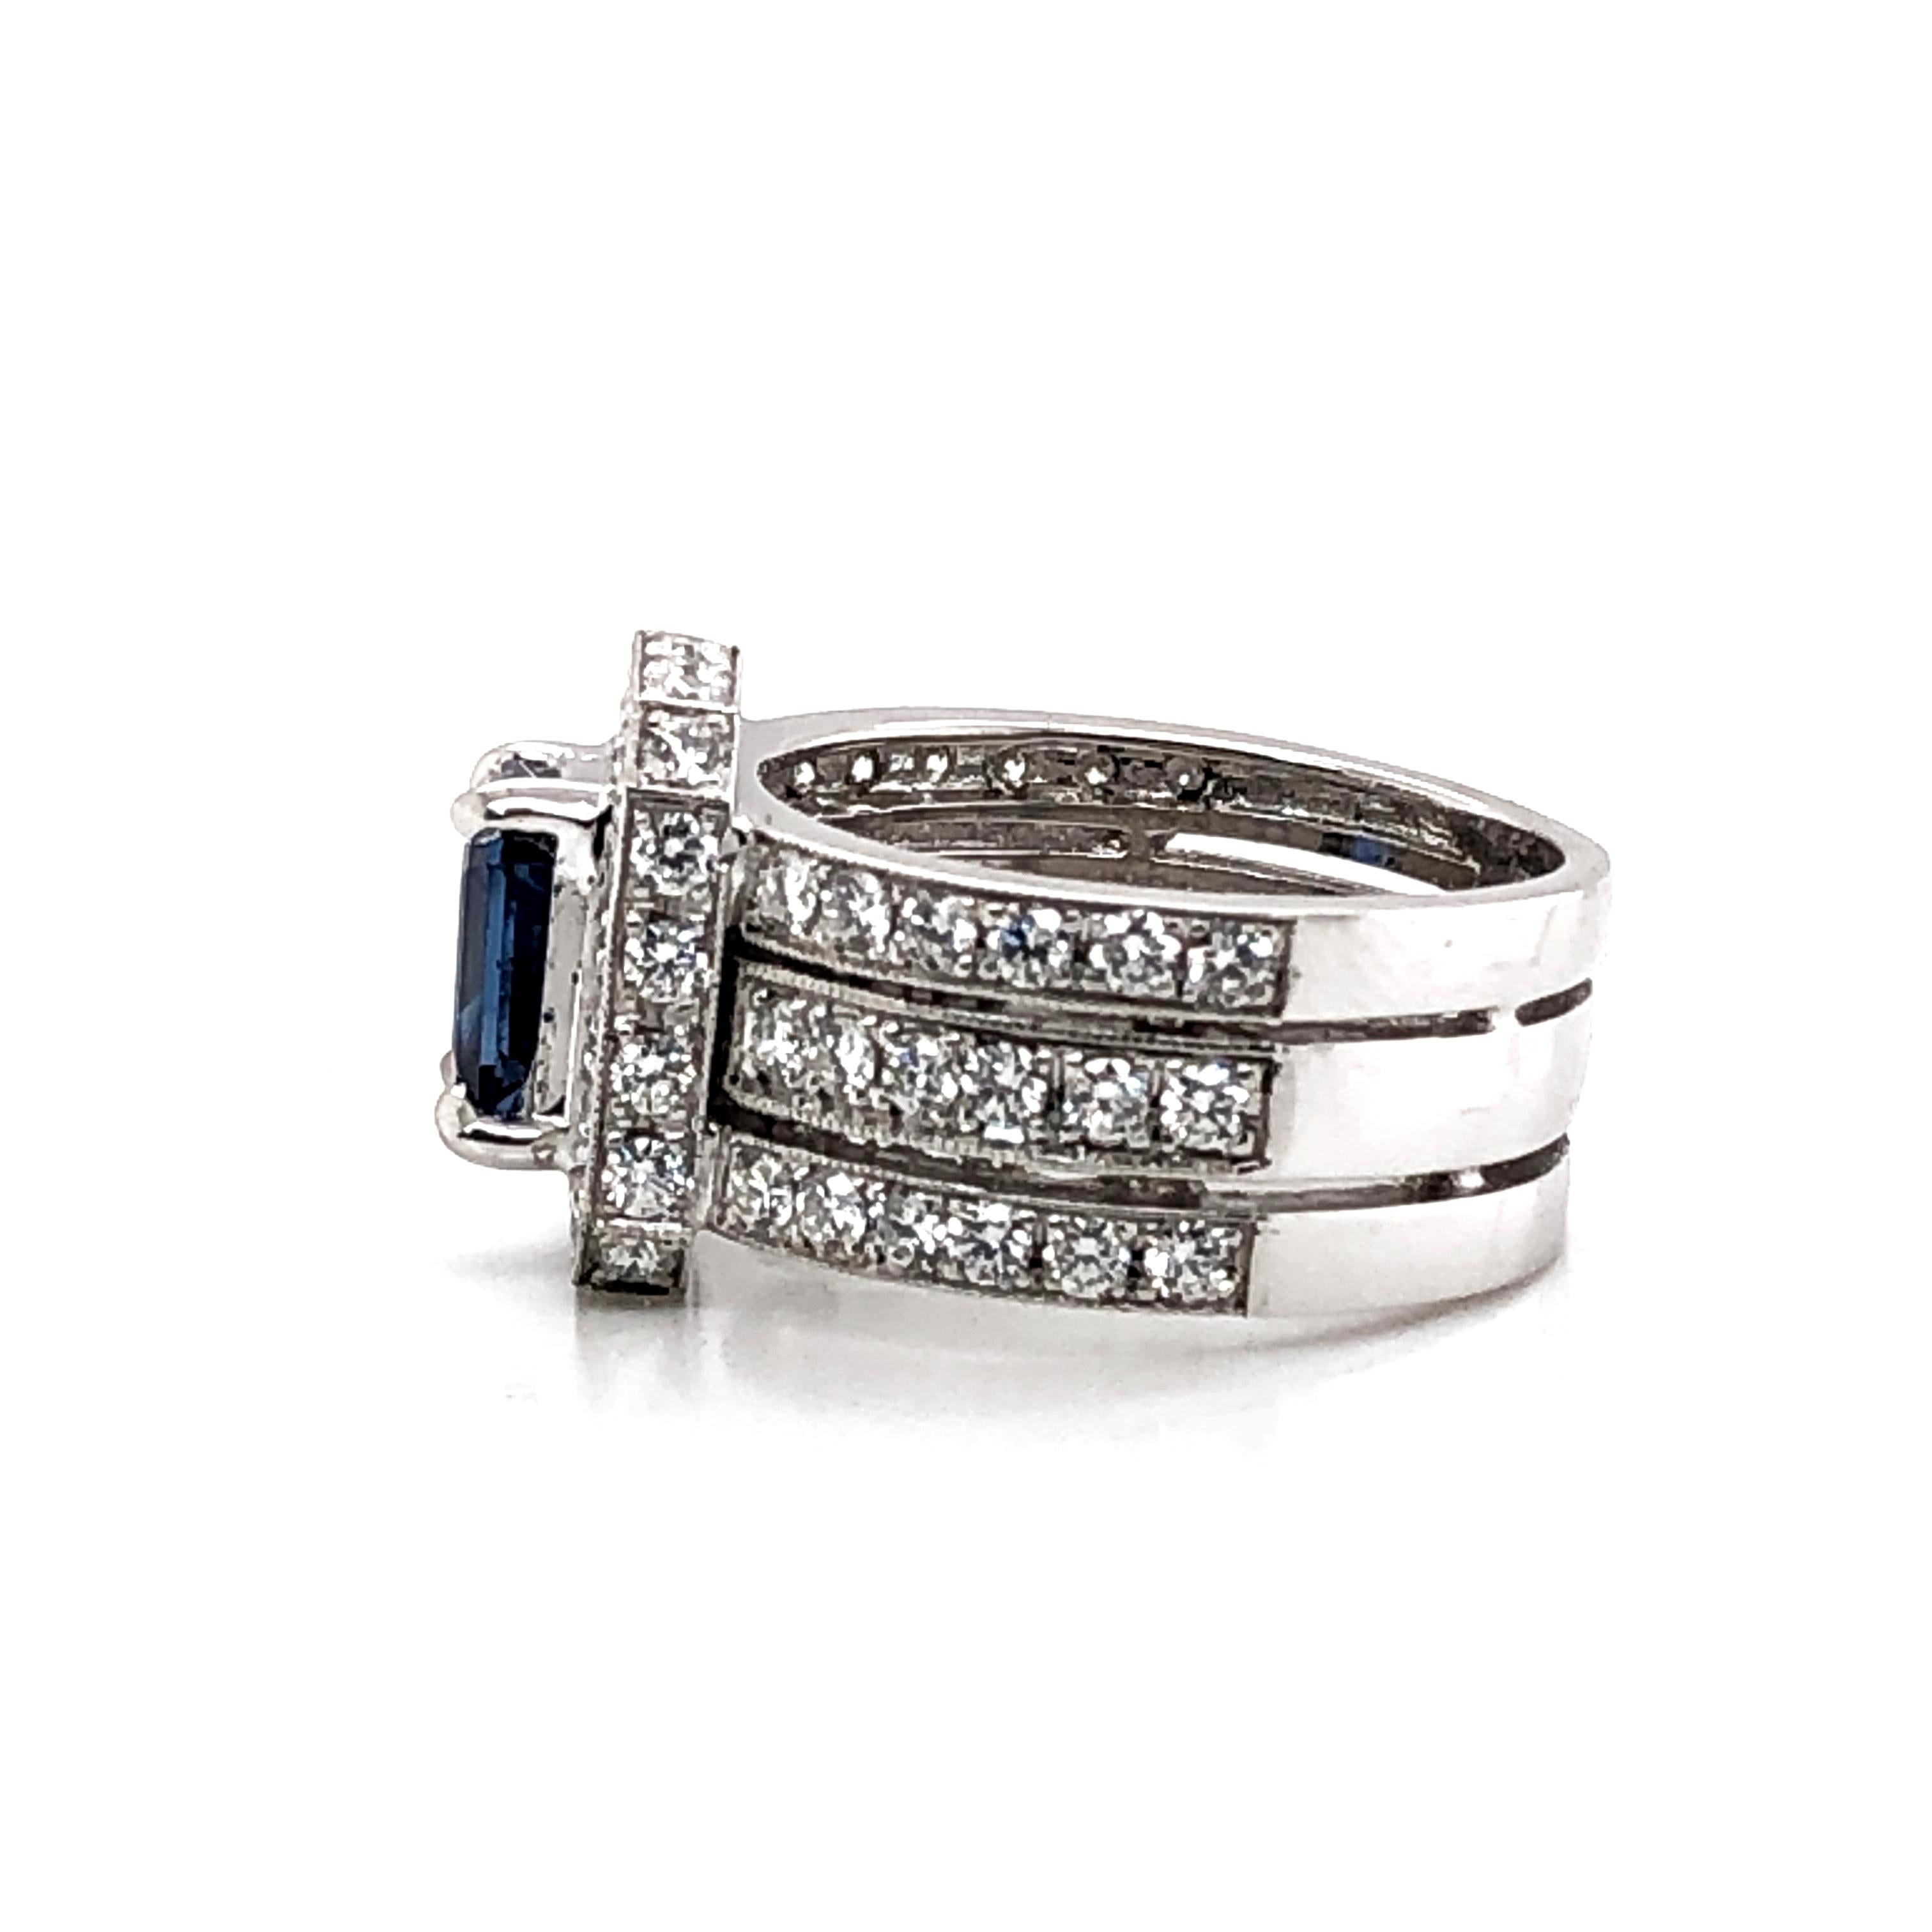 Ceylon Sapphire 1.98 Carat Diamonds Platinum Cocktail Ring In New Condition For Sale In New York, NY